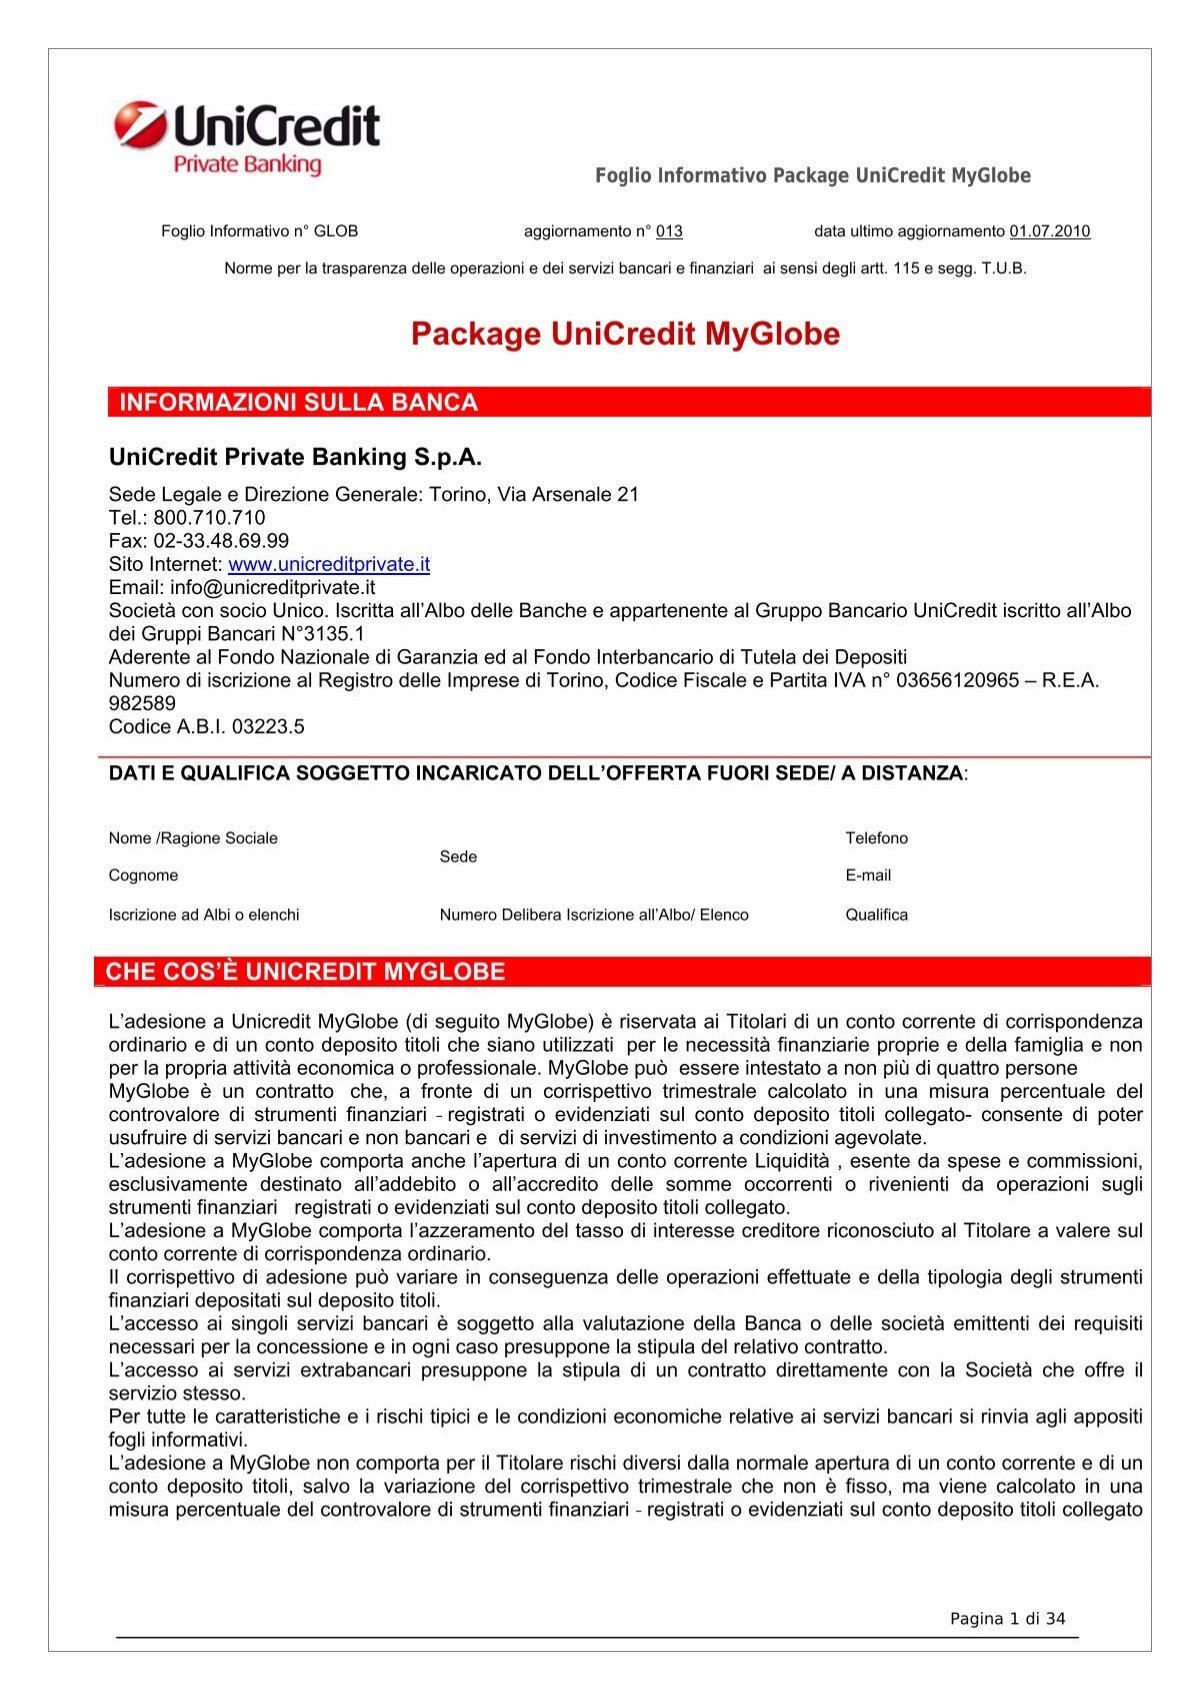 Package Unicredit Myglobe